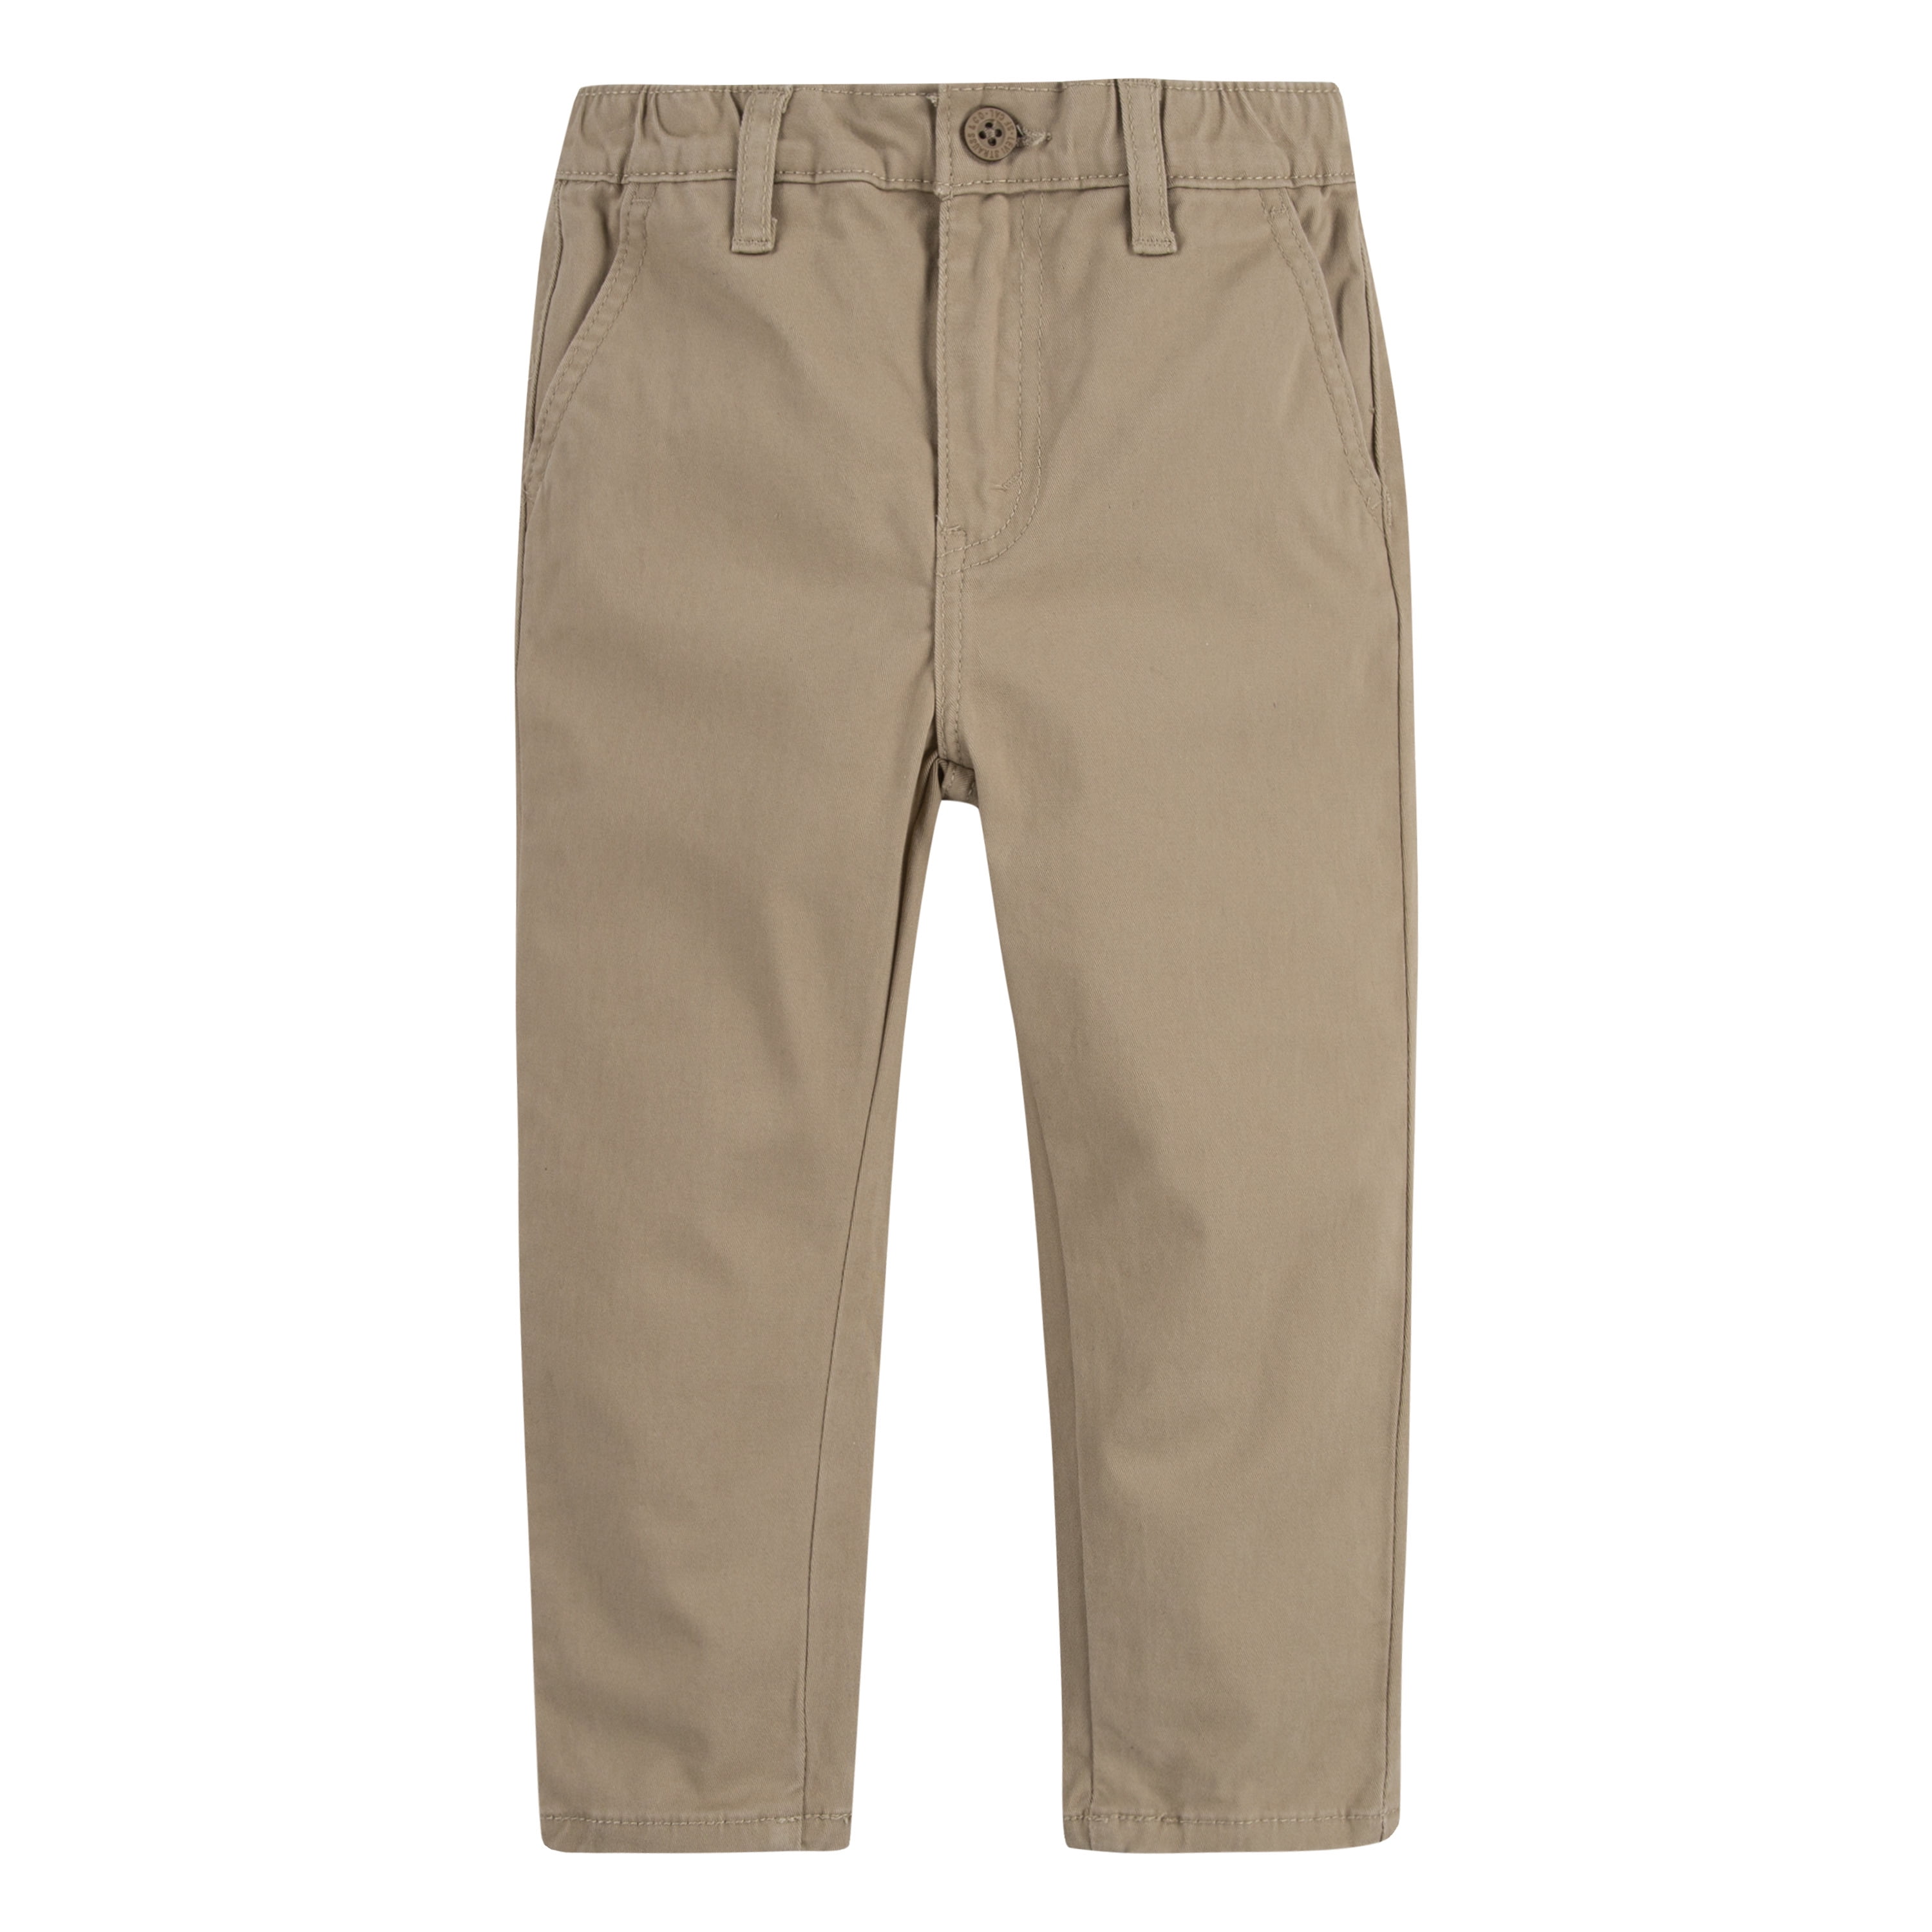 Levi's Toddler Boys' Pull On Chino Pants, Sizes 2T-4T - Walmart.com